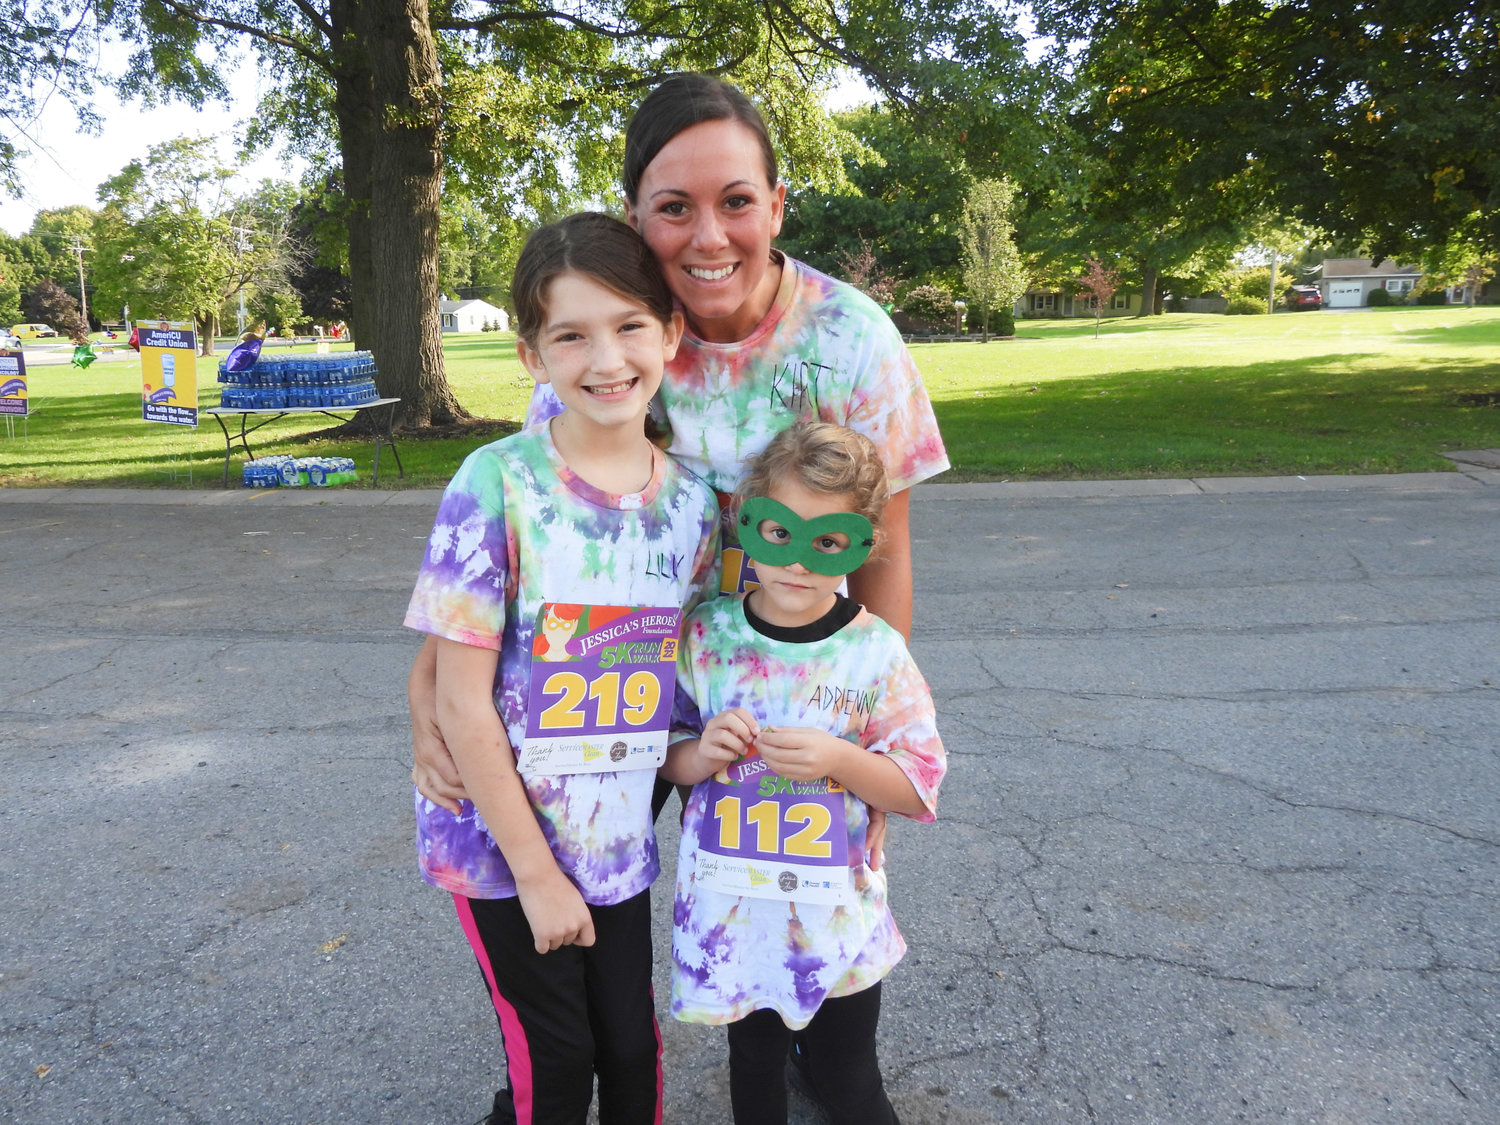 Lily Woods, 9, of Oneida, left, Kirsten Konowich, of Canastota, center, and Adrienne Konowich, 6, of Oneida, attend the Jessica's Heroes Foundation 5K Fundraiser.